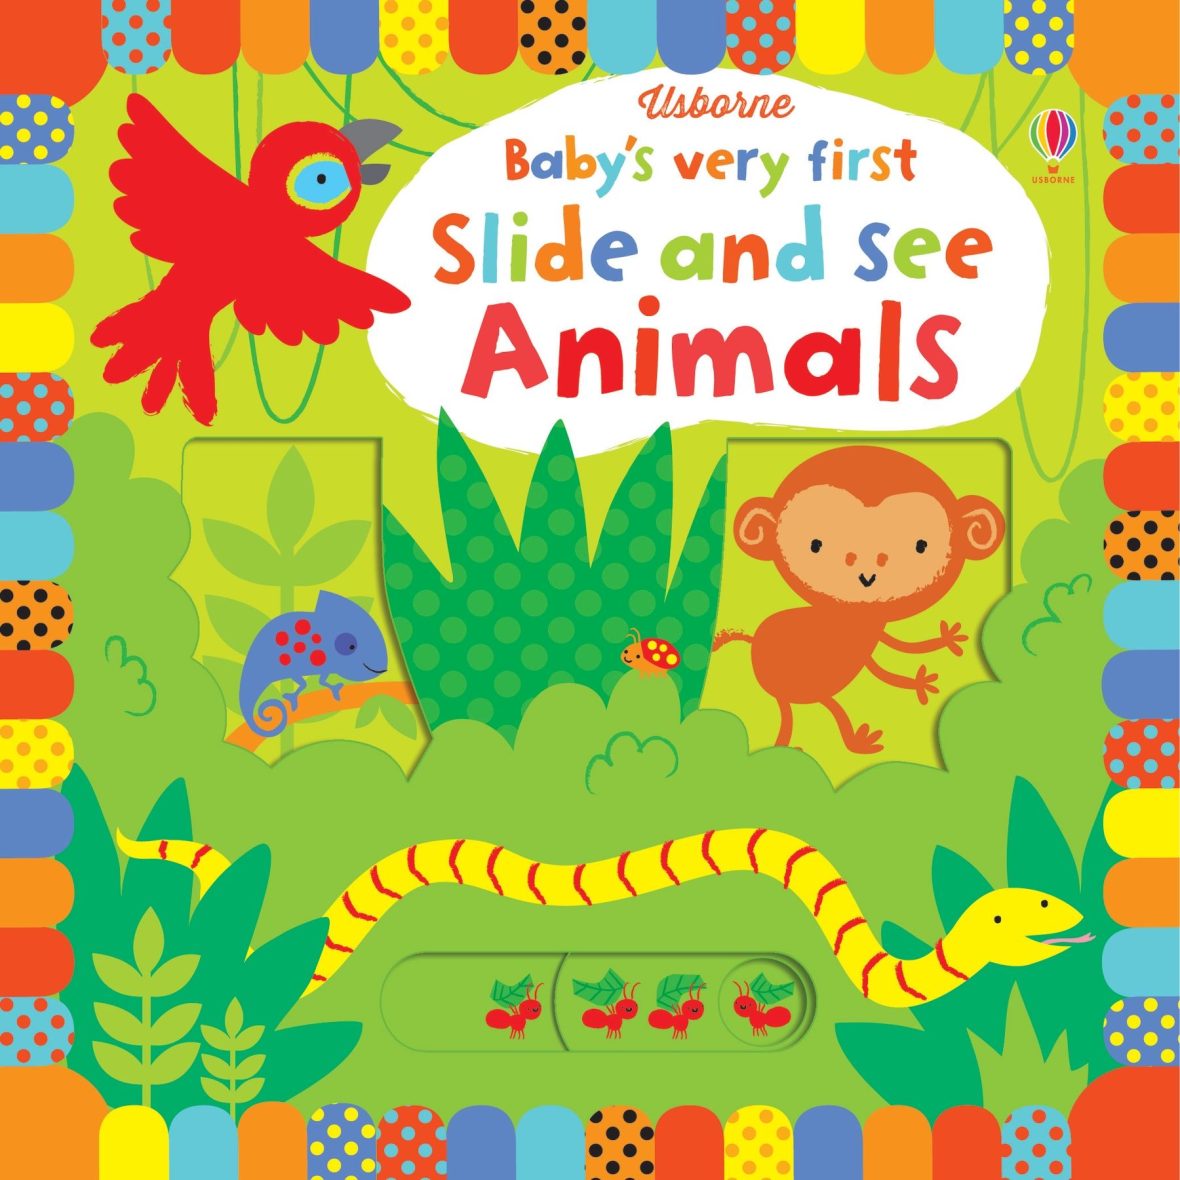 Usborne baby’s very first slide and see animals (Board Book)